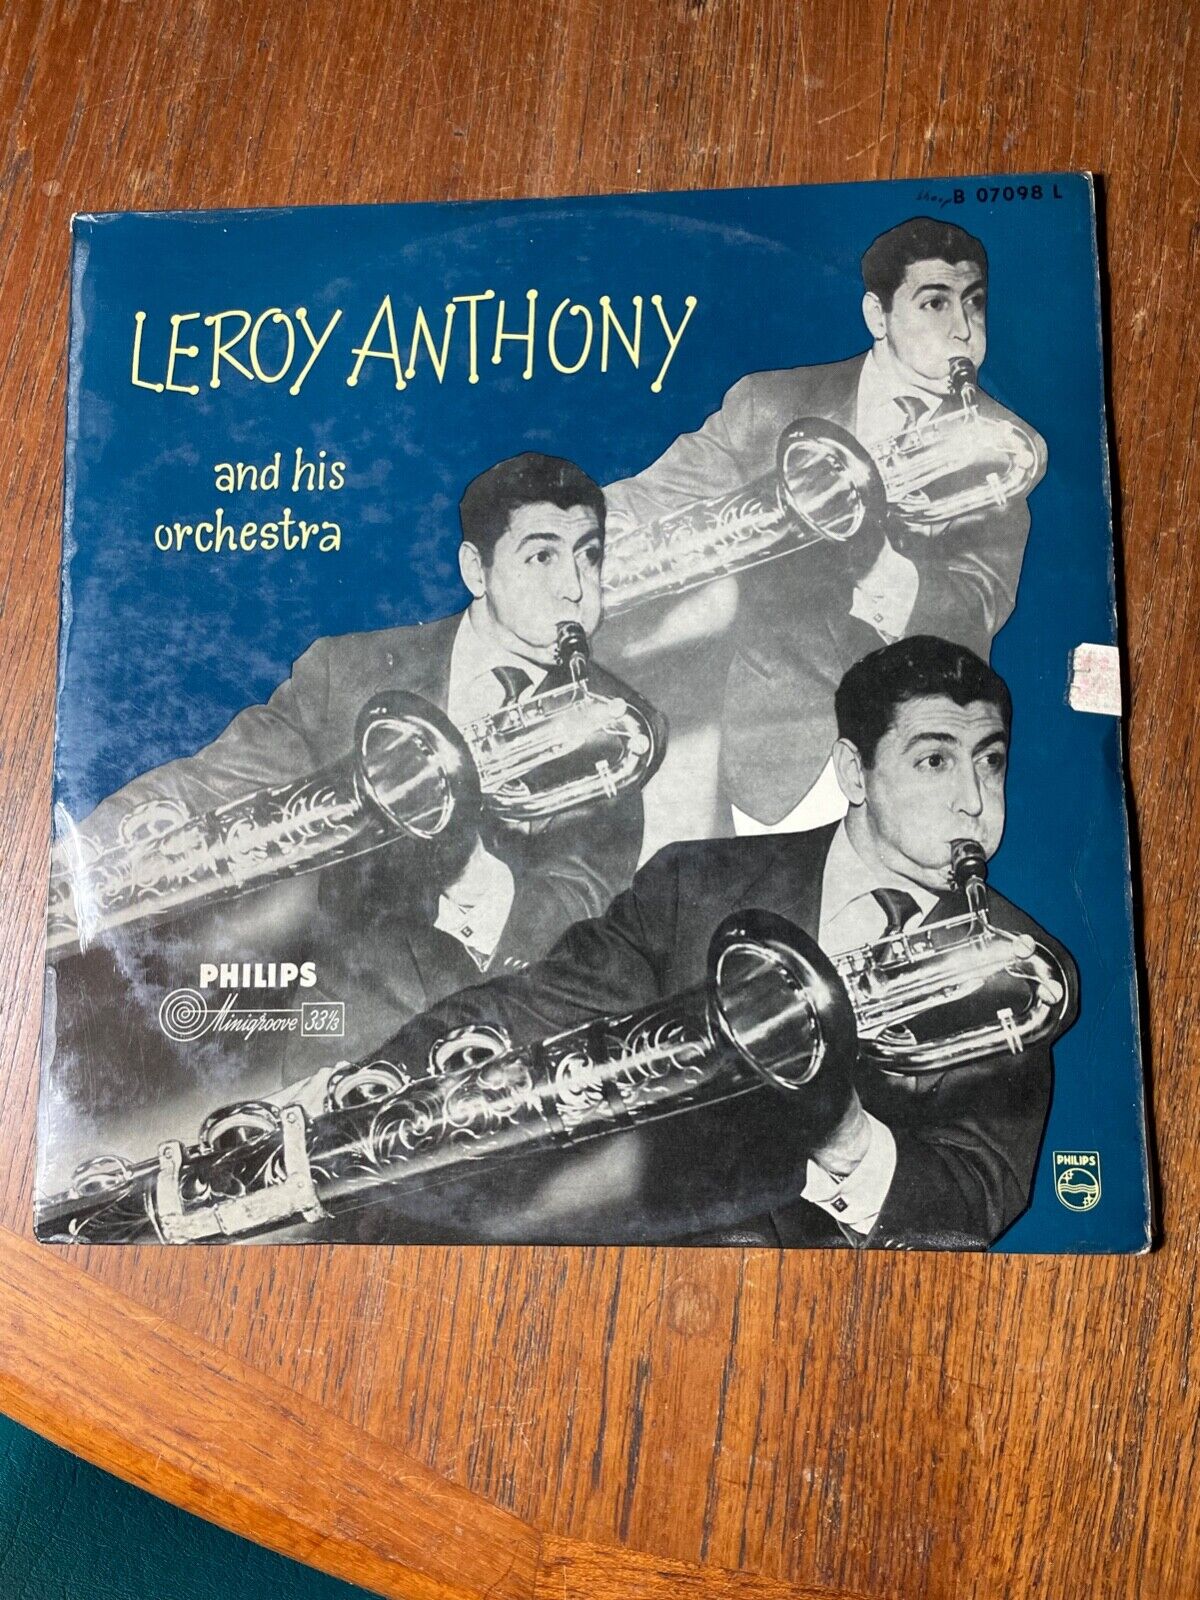 LEROY ANTHONY AND HIS ORCHESTRA LP Philips Records B07098 VINYL RECORD VG